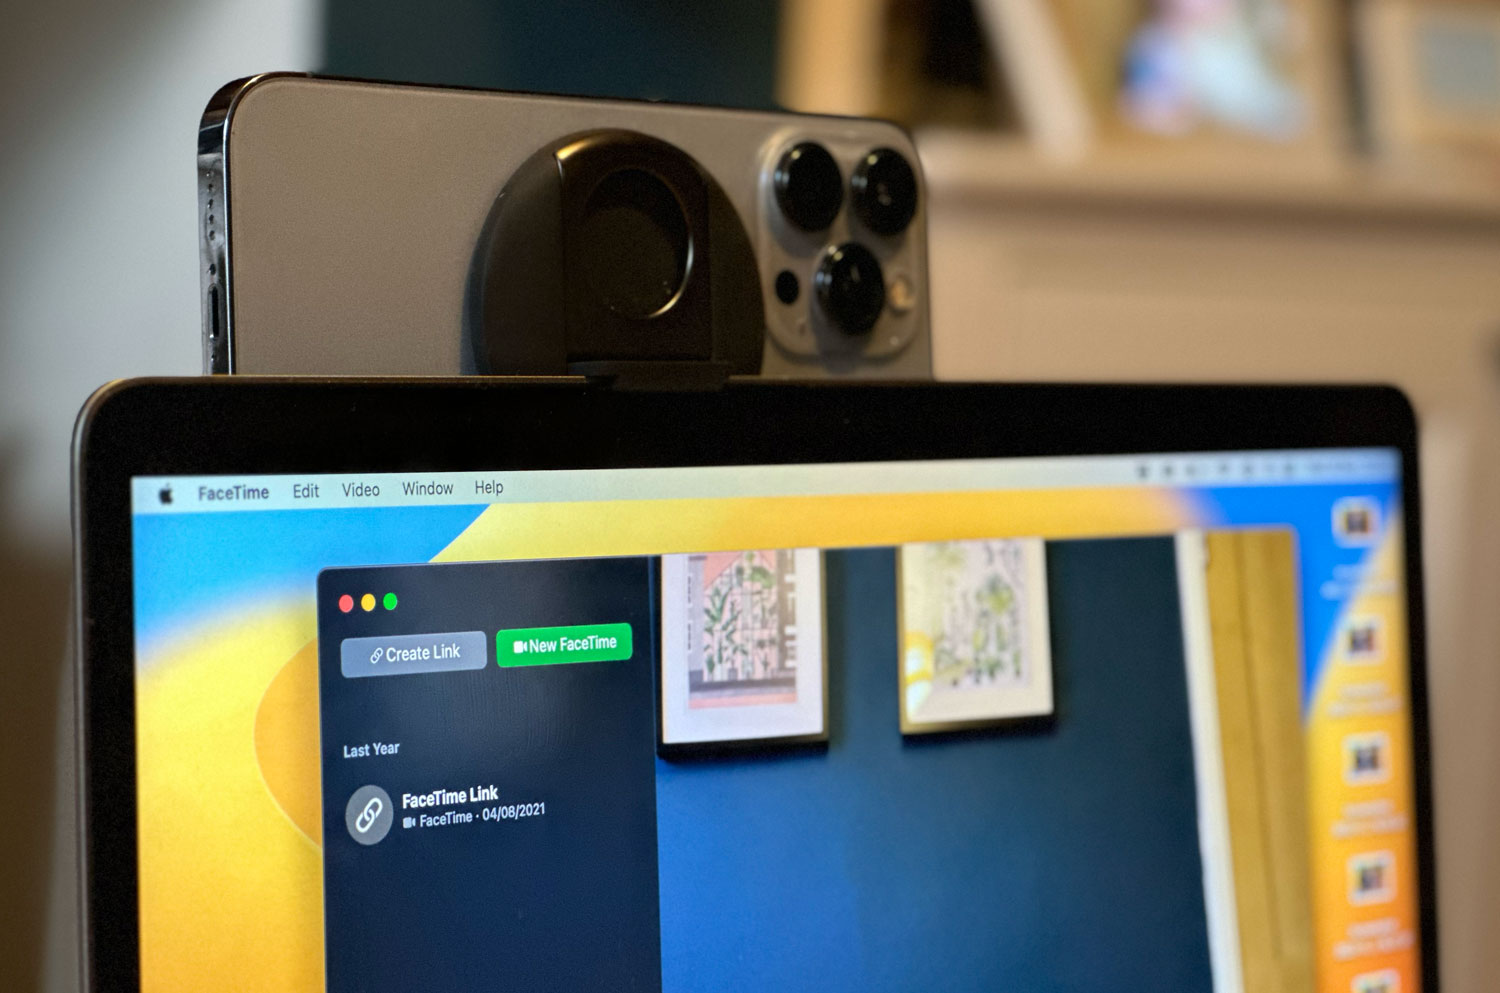 How to Use iPhone as a Webcam on Mac